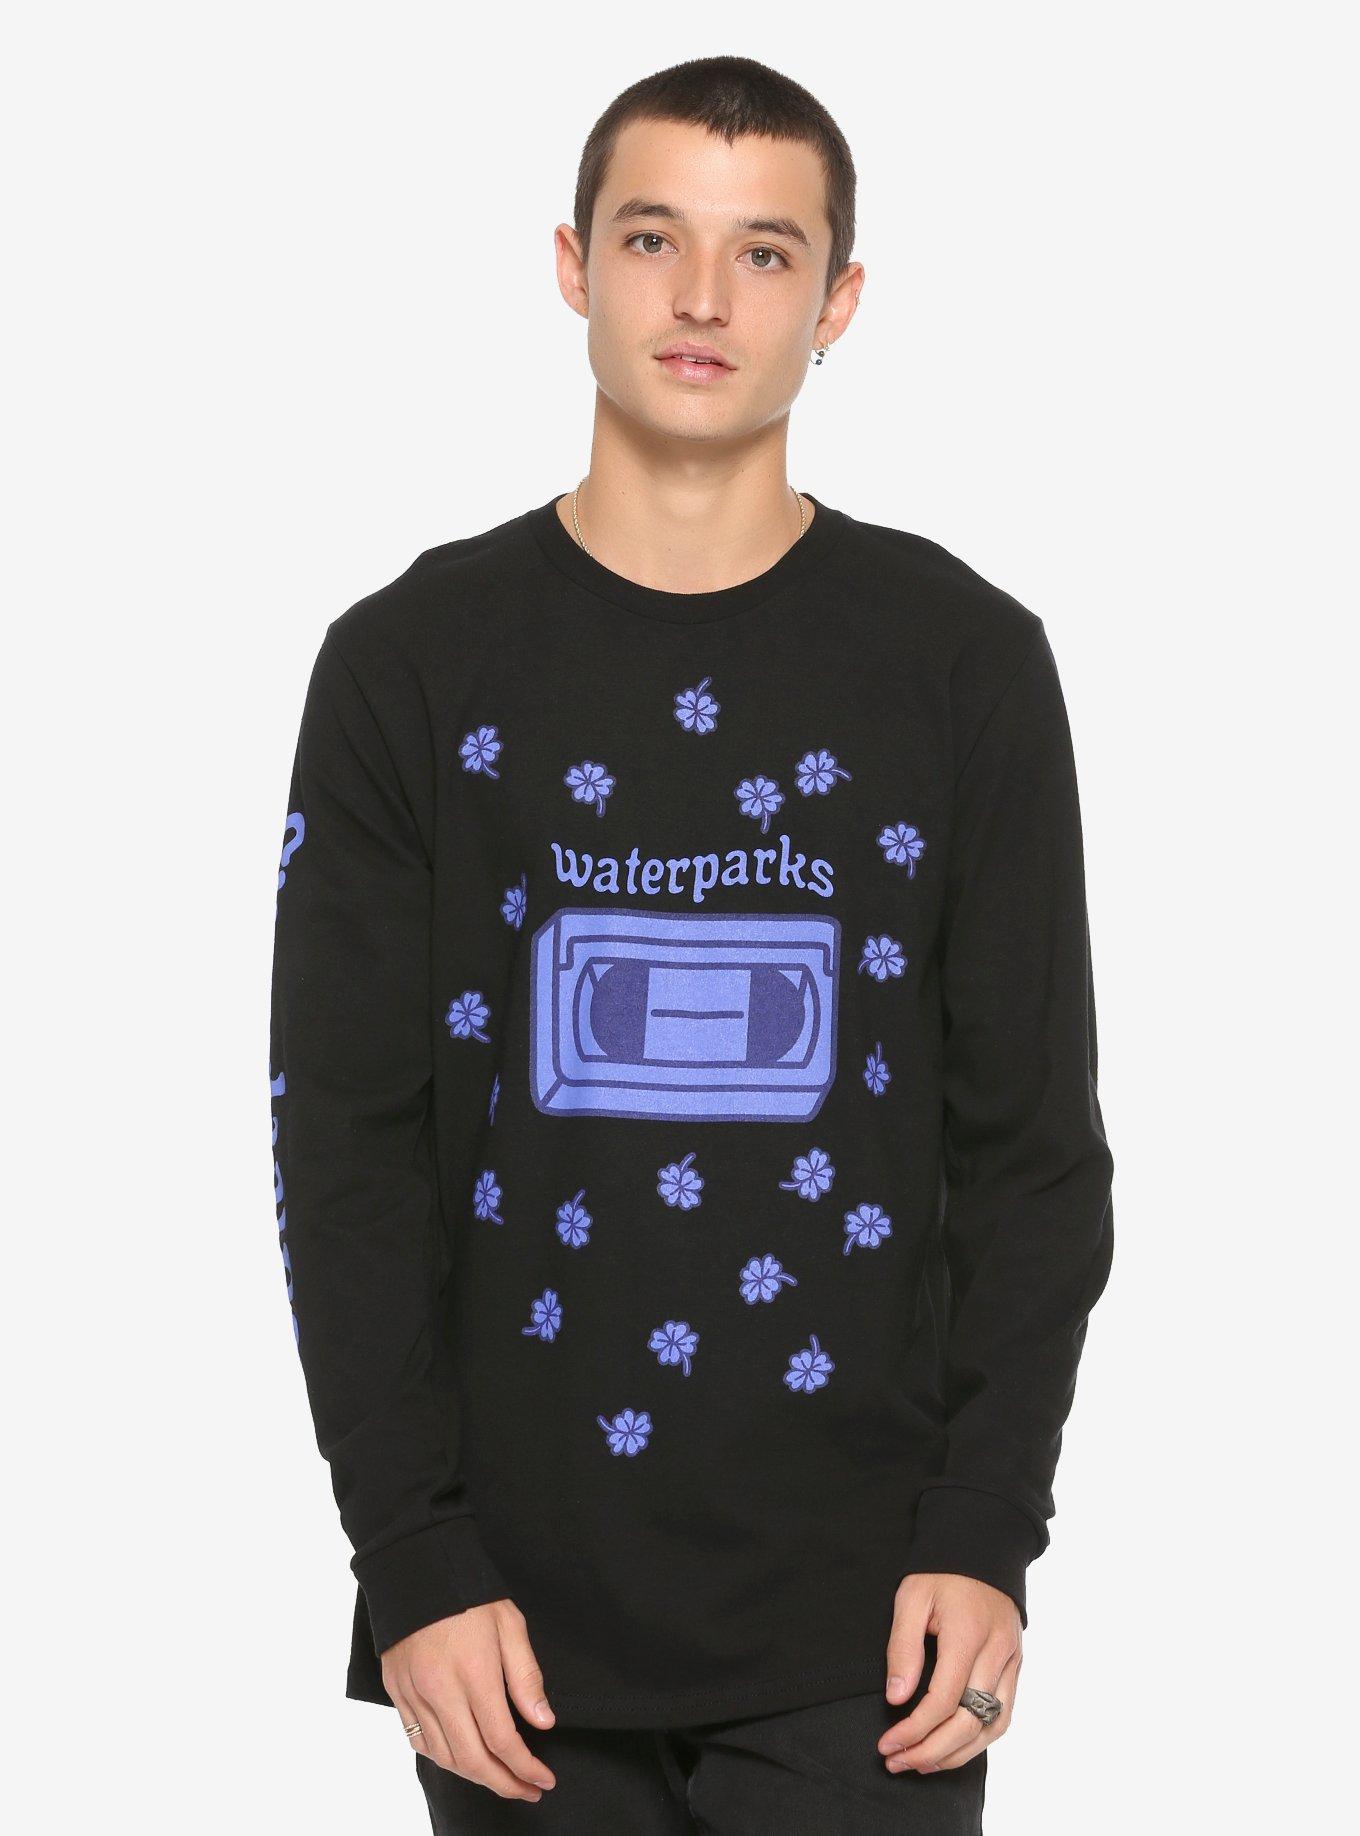 Waterparks Waterparks Clover VHS Long-Sleeve T-Shirt, BLACK, hi-res